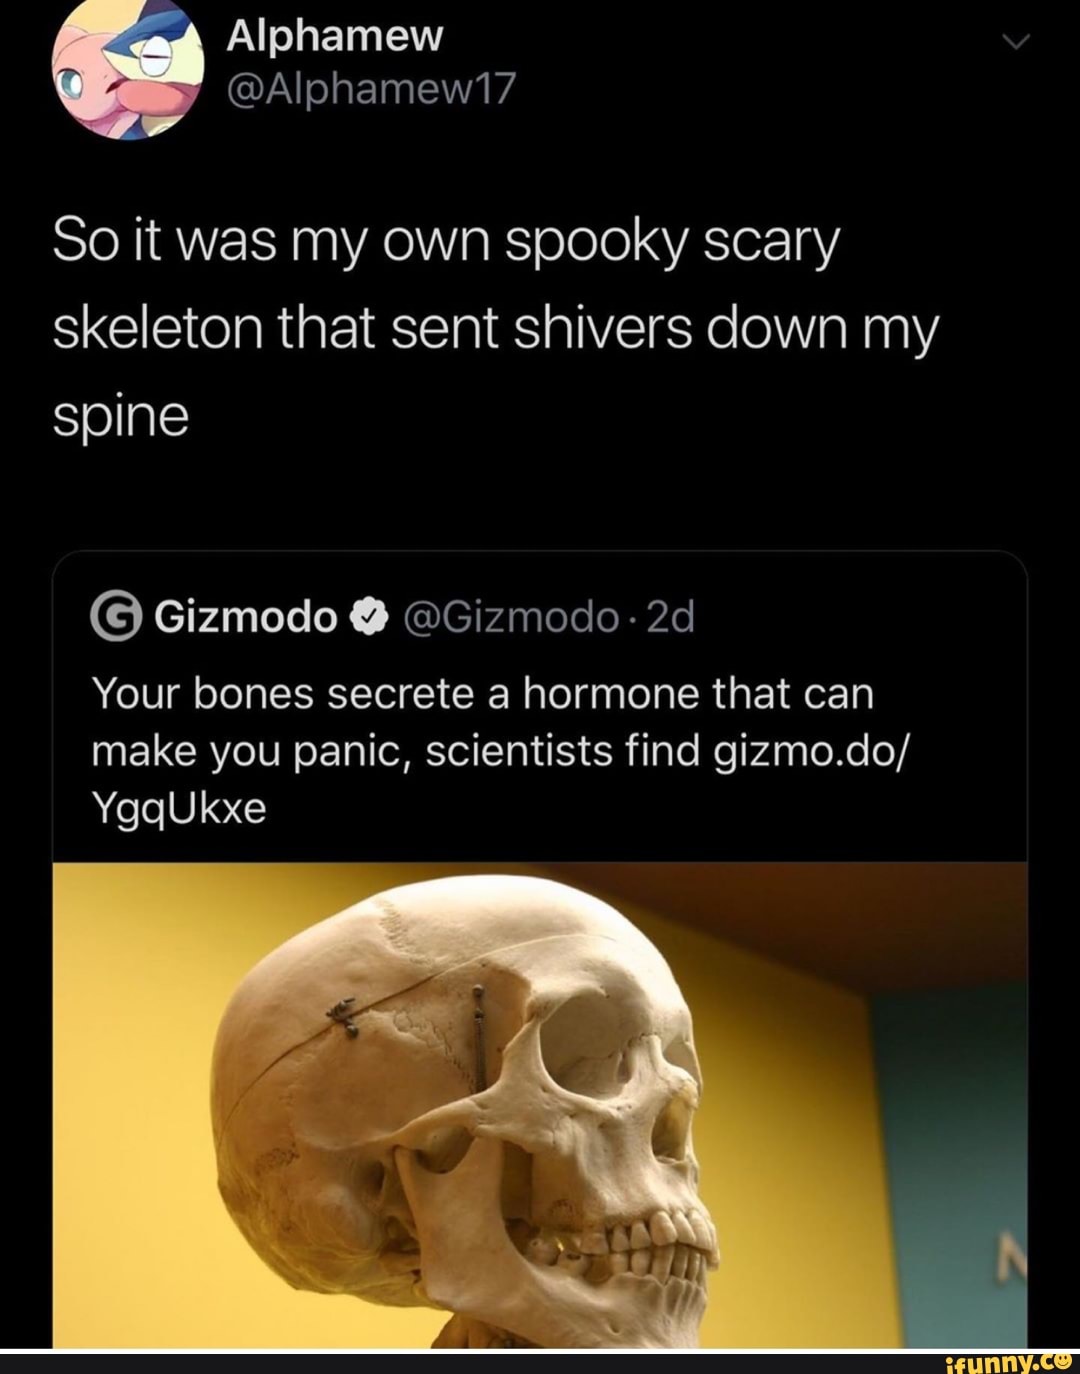 spooky scary skeletons sends shivers down your spine